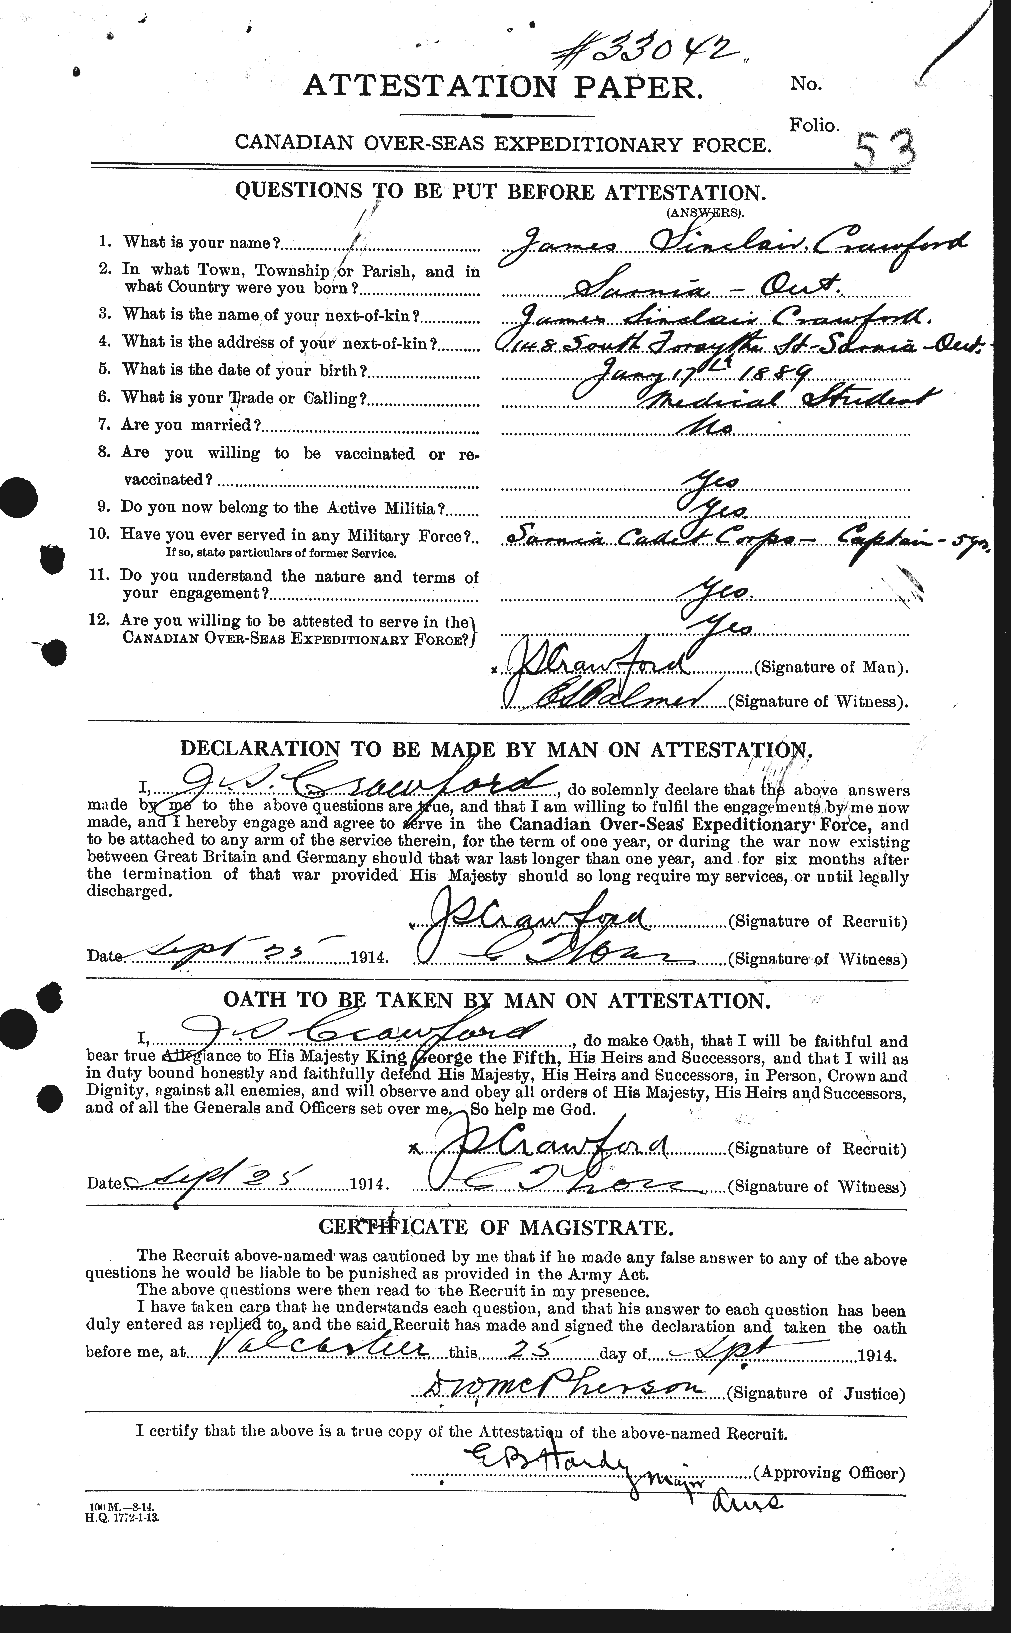 Personnel Records of the First World War - CEF 062467a